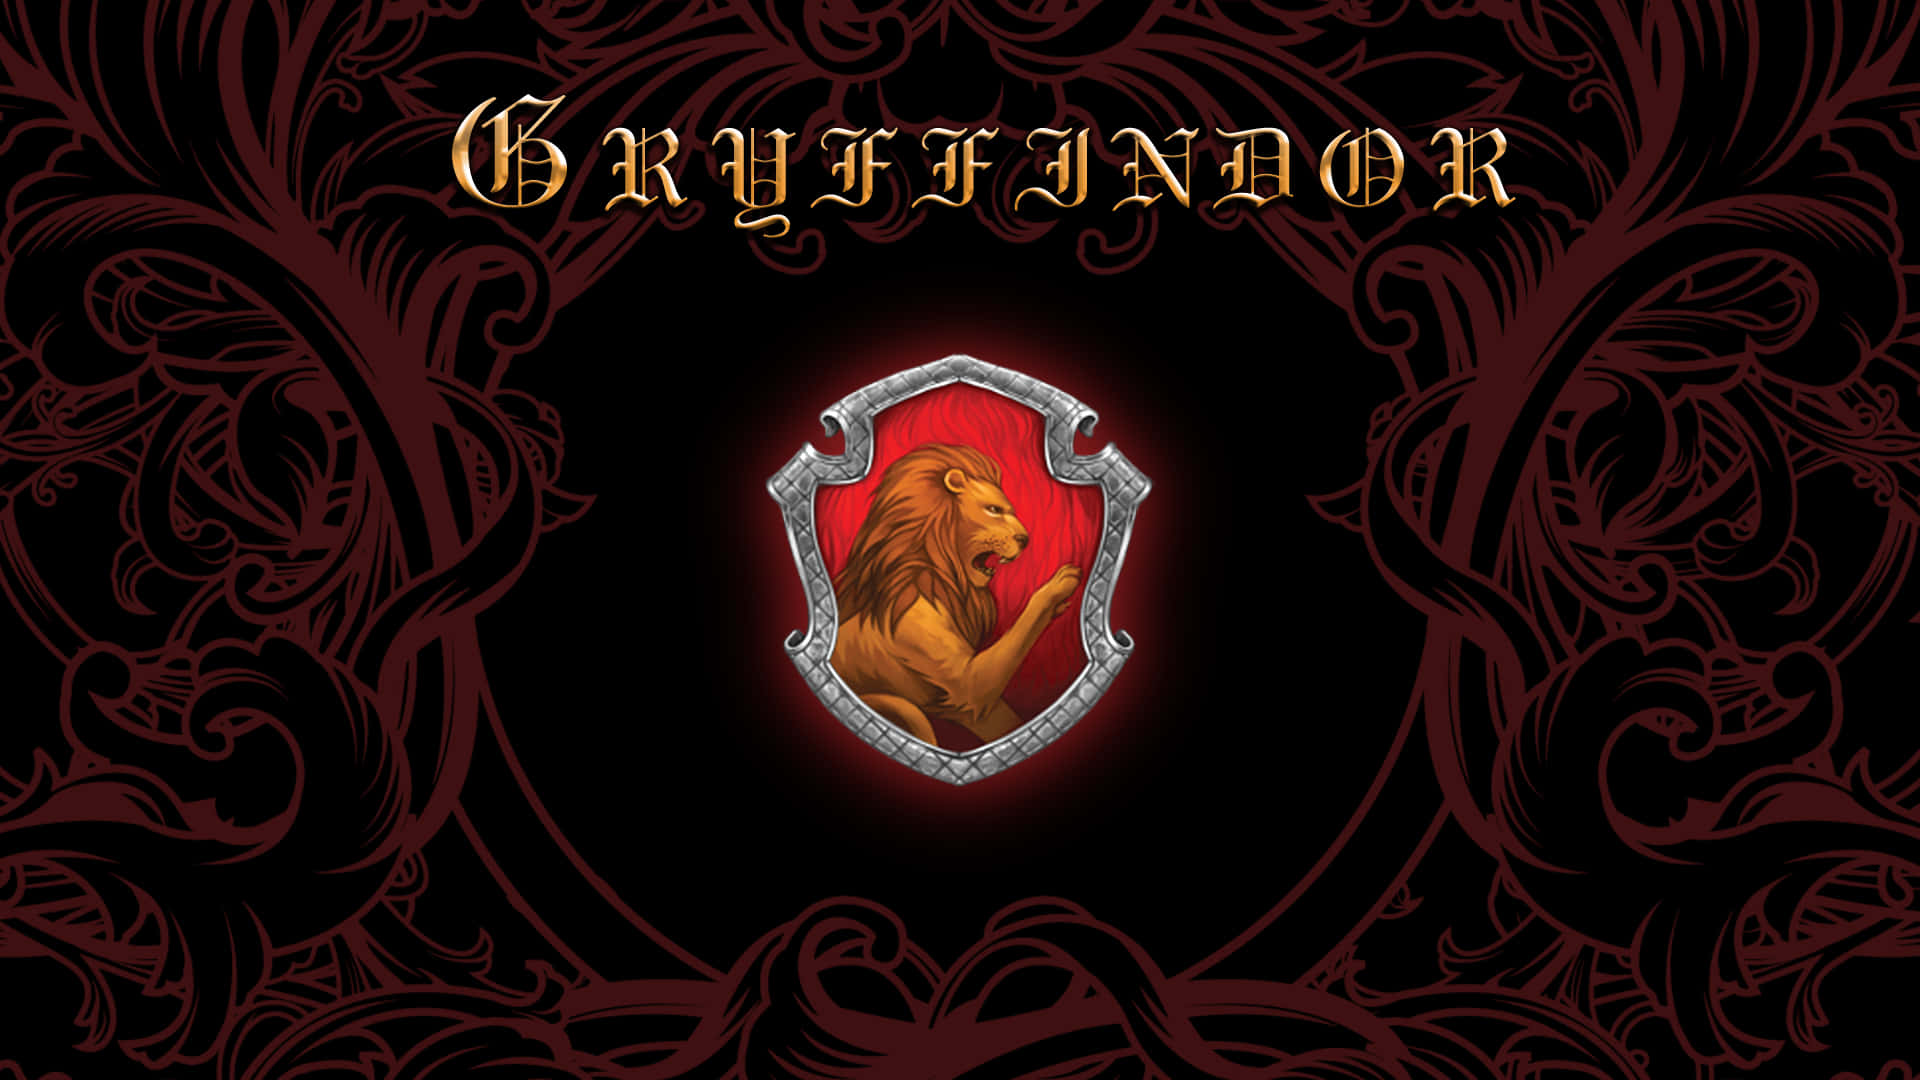 The Brave and True Hearts of Gryffindor